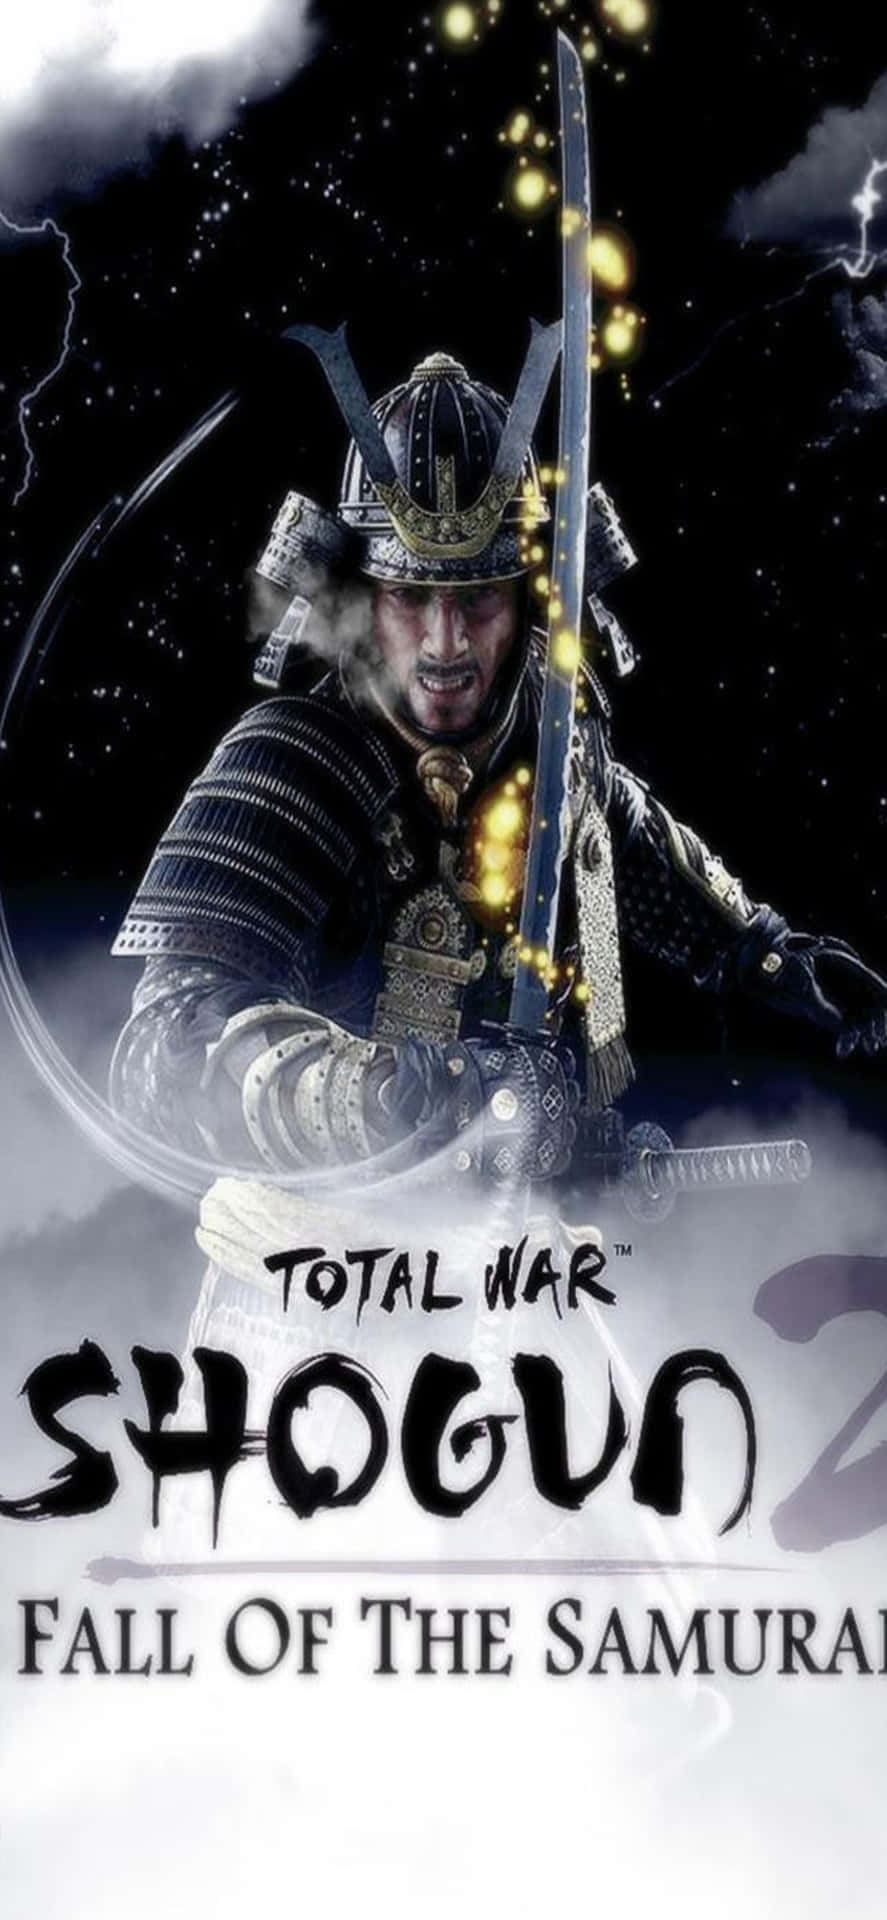 Conquer enemies with the power of the Iphone Xs Max and Shogun 2 Total War